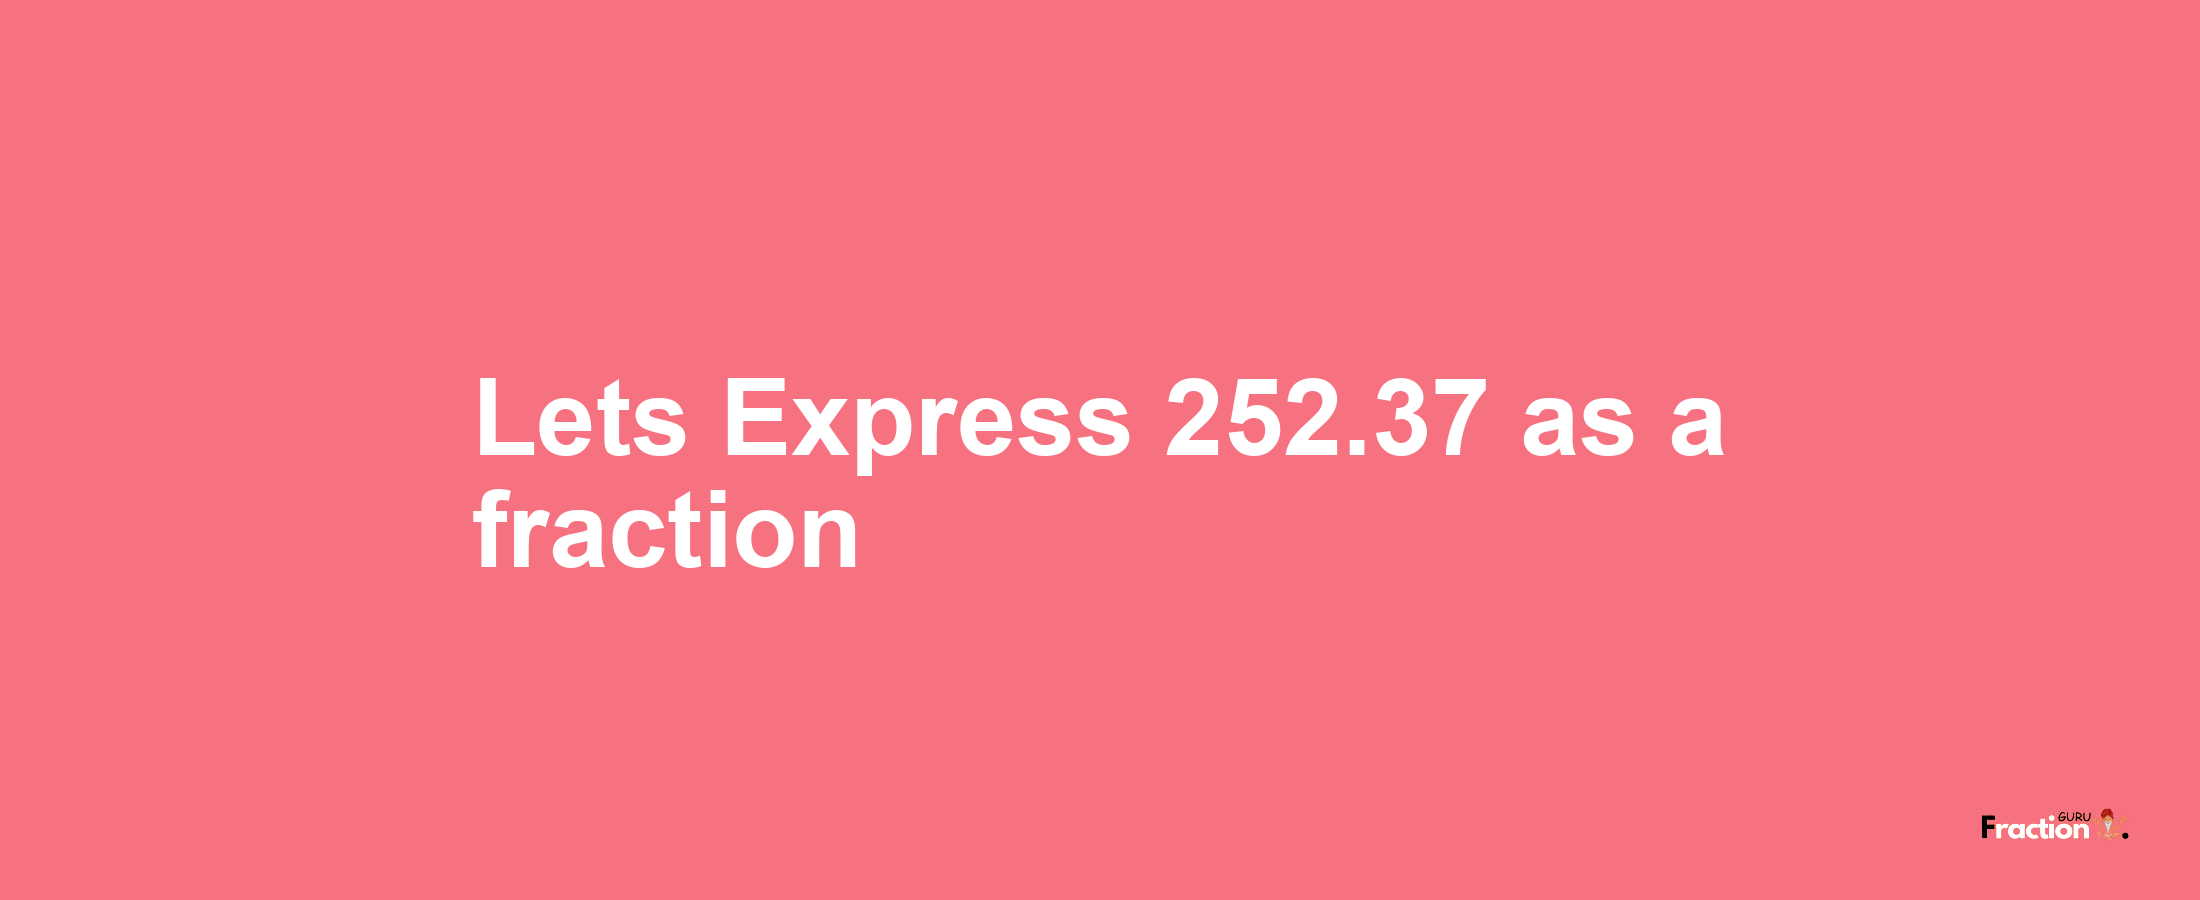 Lets Express 252.37 as afraction